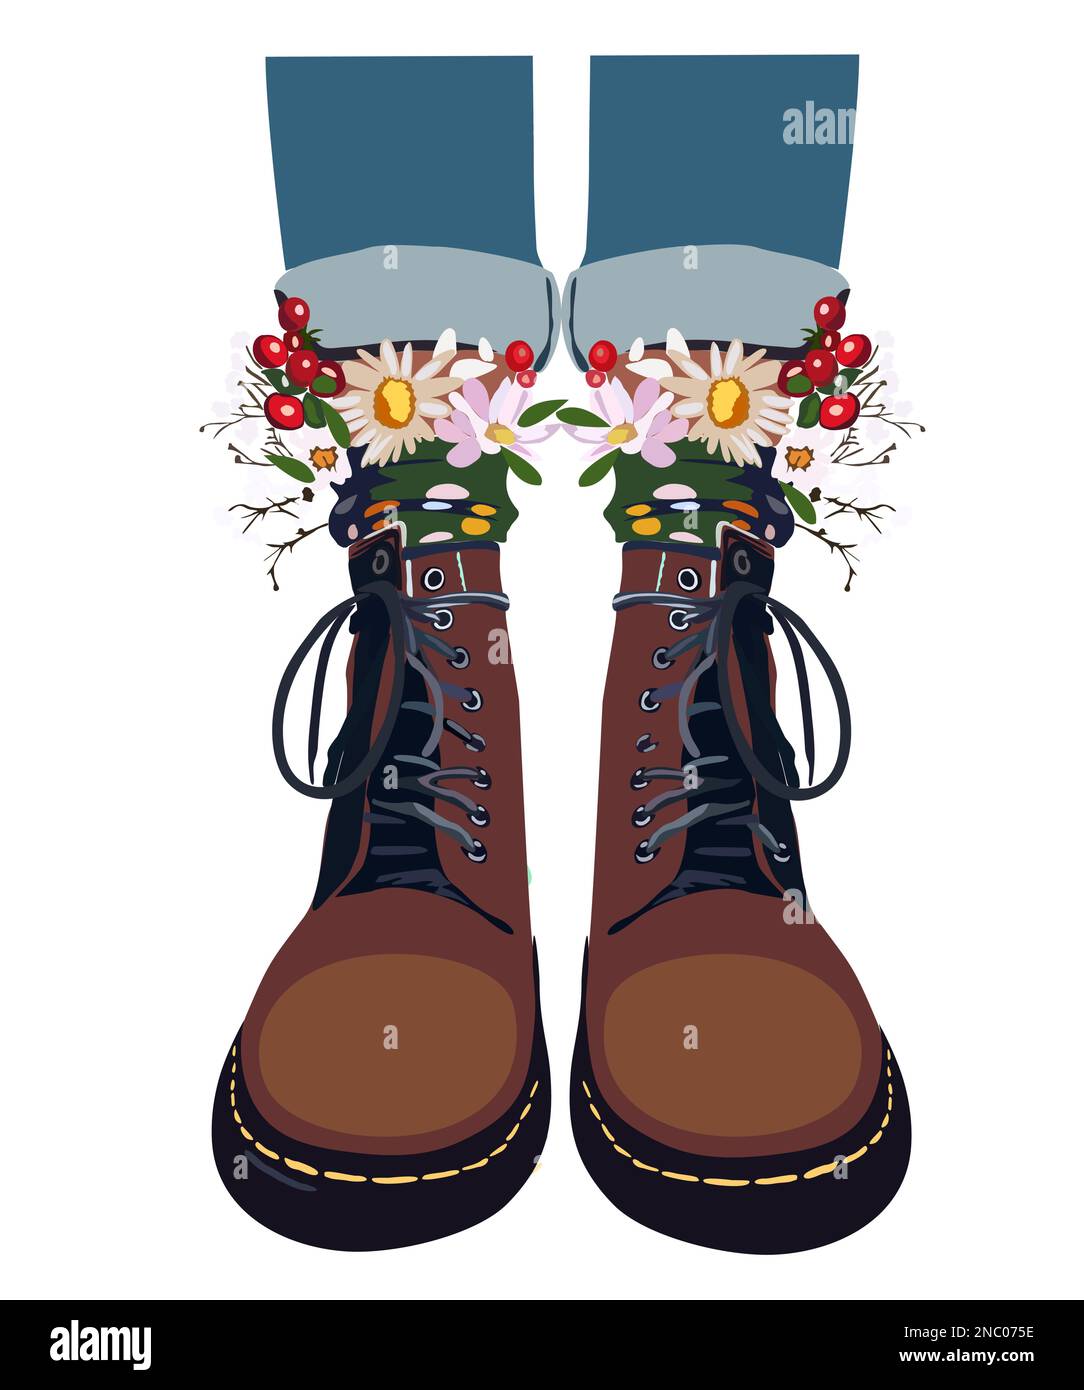 Dr martens boots Stock Vector Images - Alamy